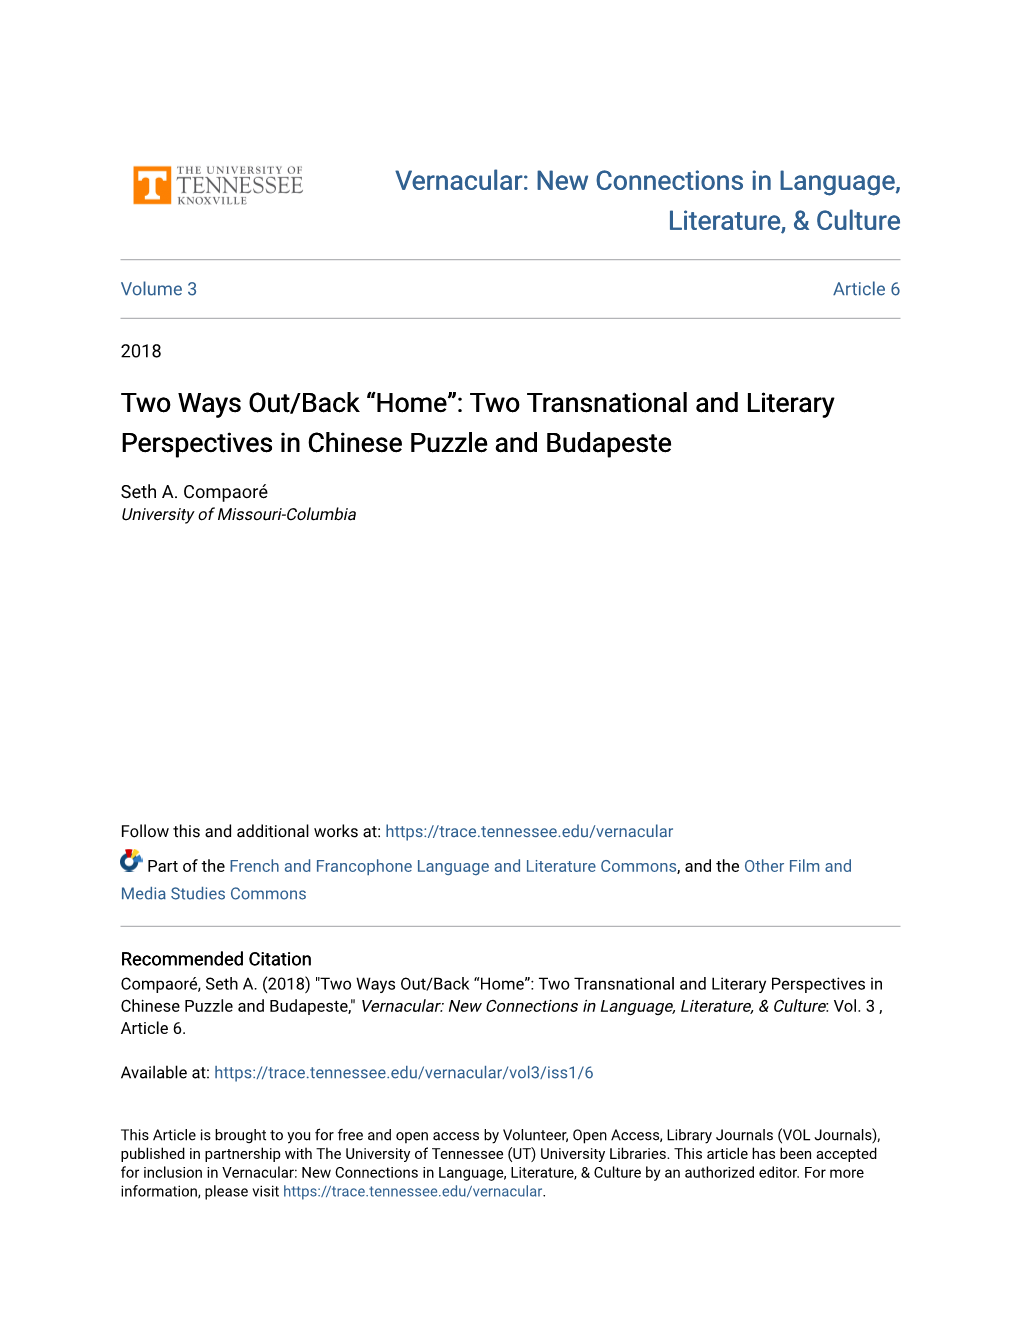 Two Transnational and Literary Perspectives in Chinese Puzzle and Budapeste